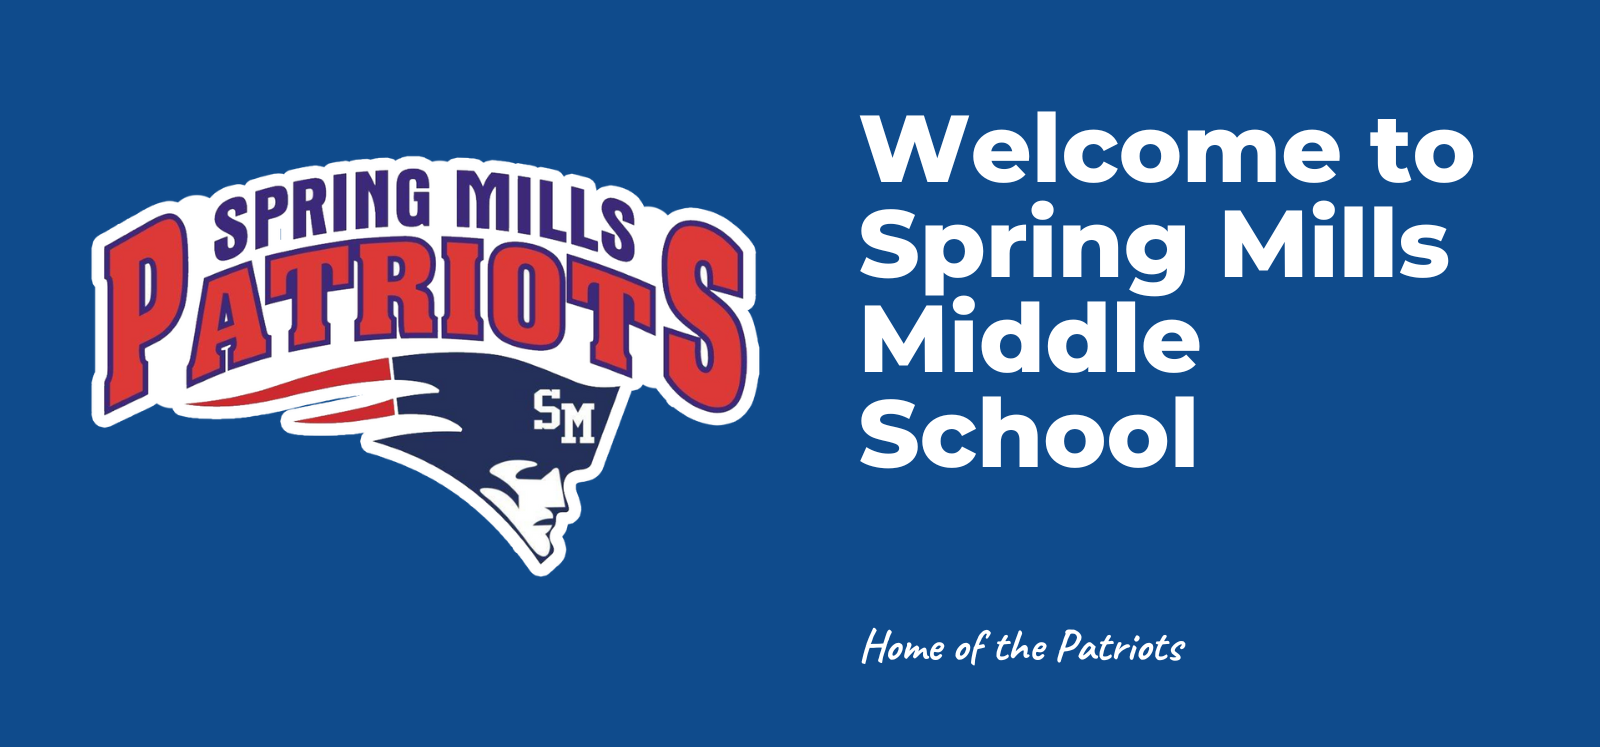 image of banner that says welcome to spring mills middle school and home of the patriots